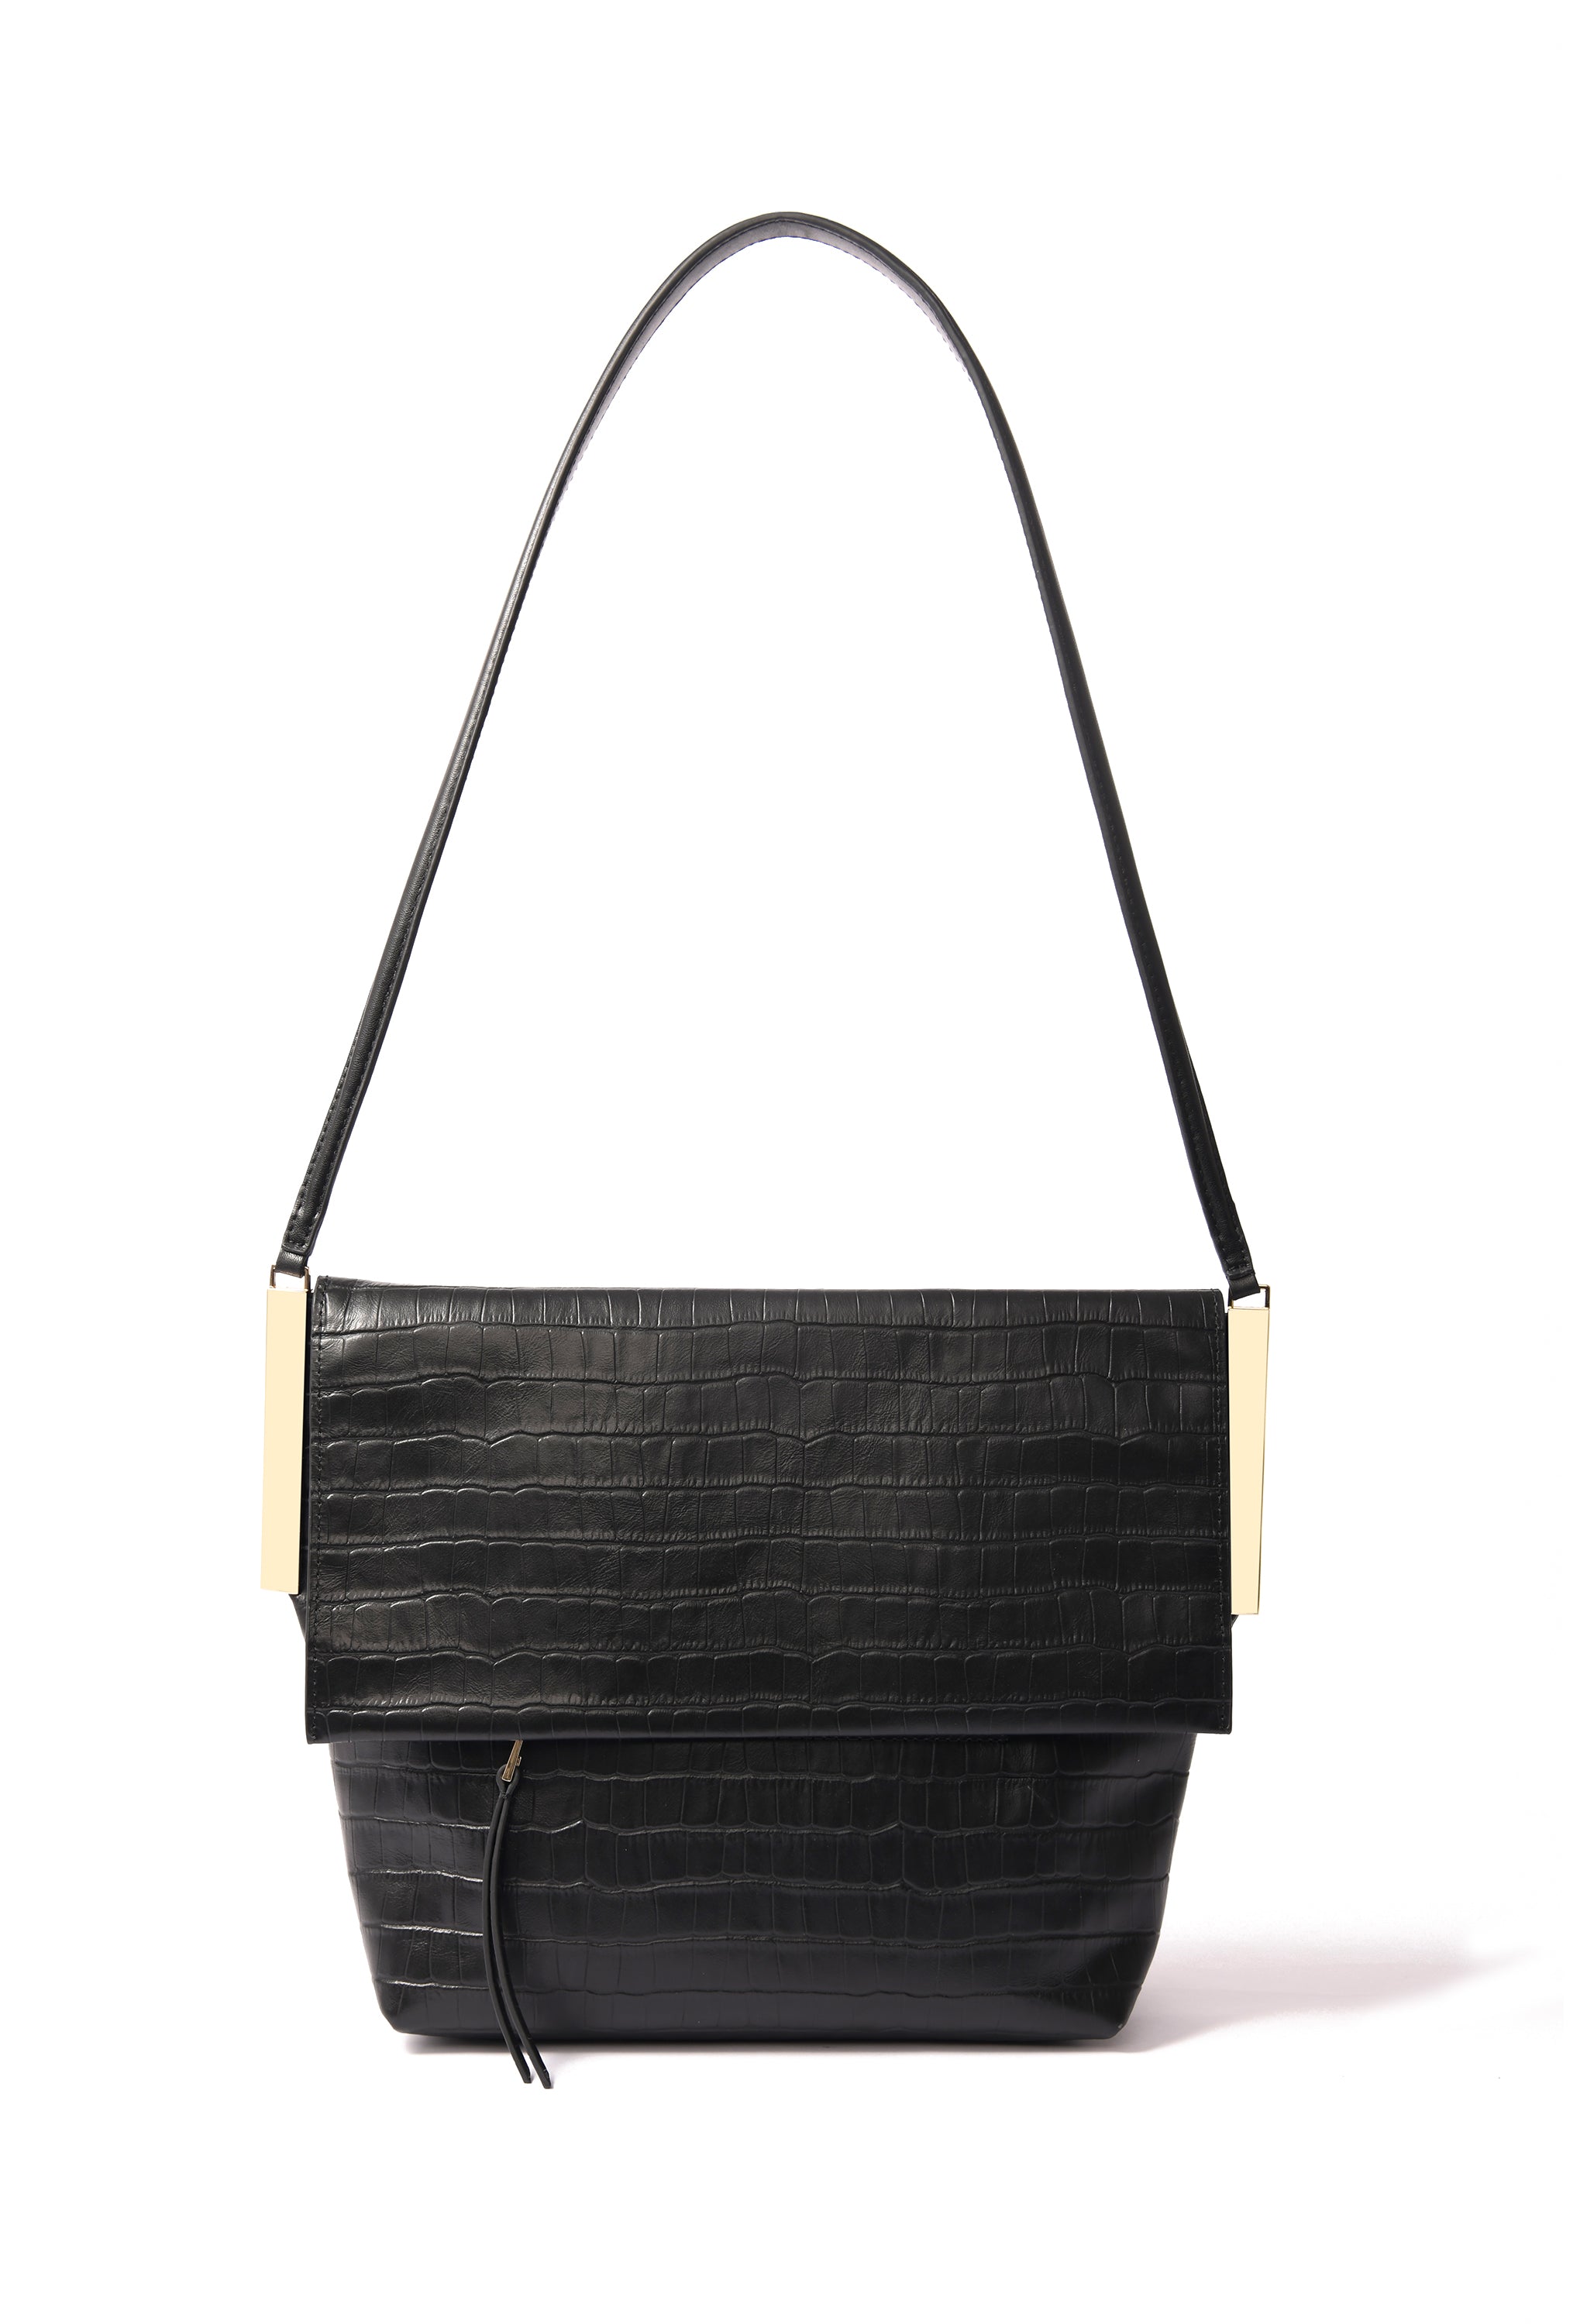 Giselle Bag in croco embossed leather, Black BOB ORE blue collection on sale 2022